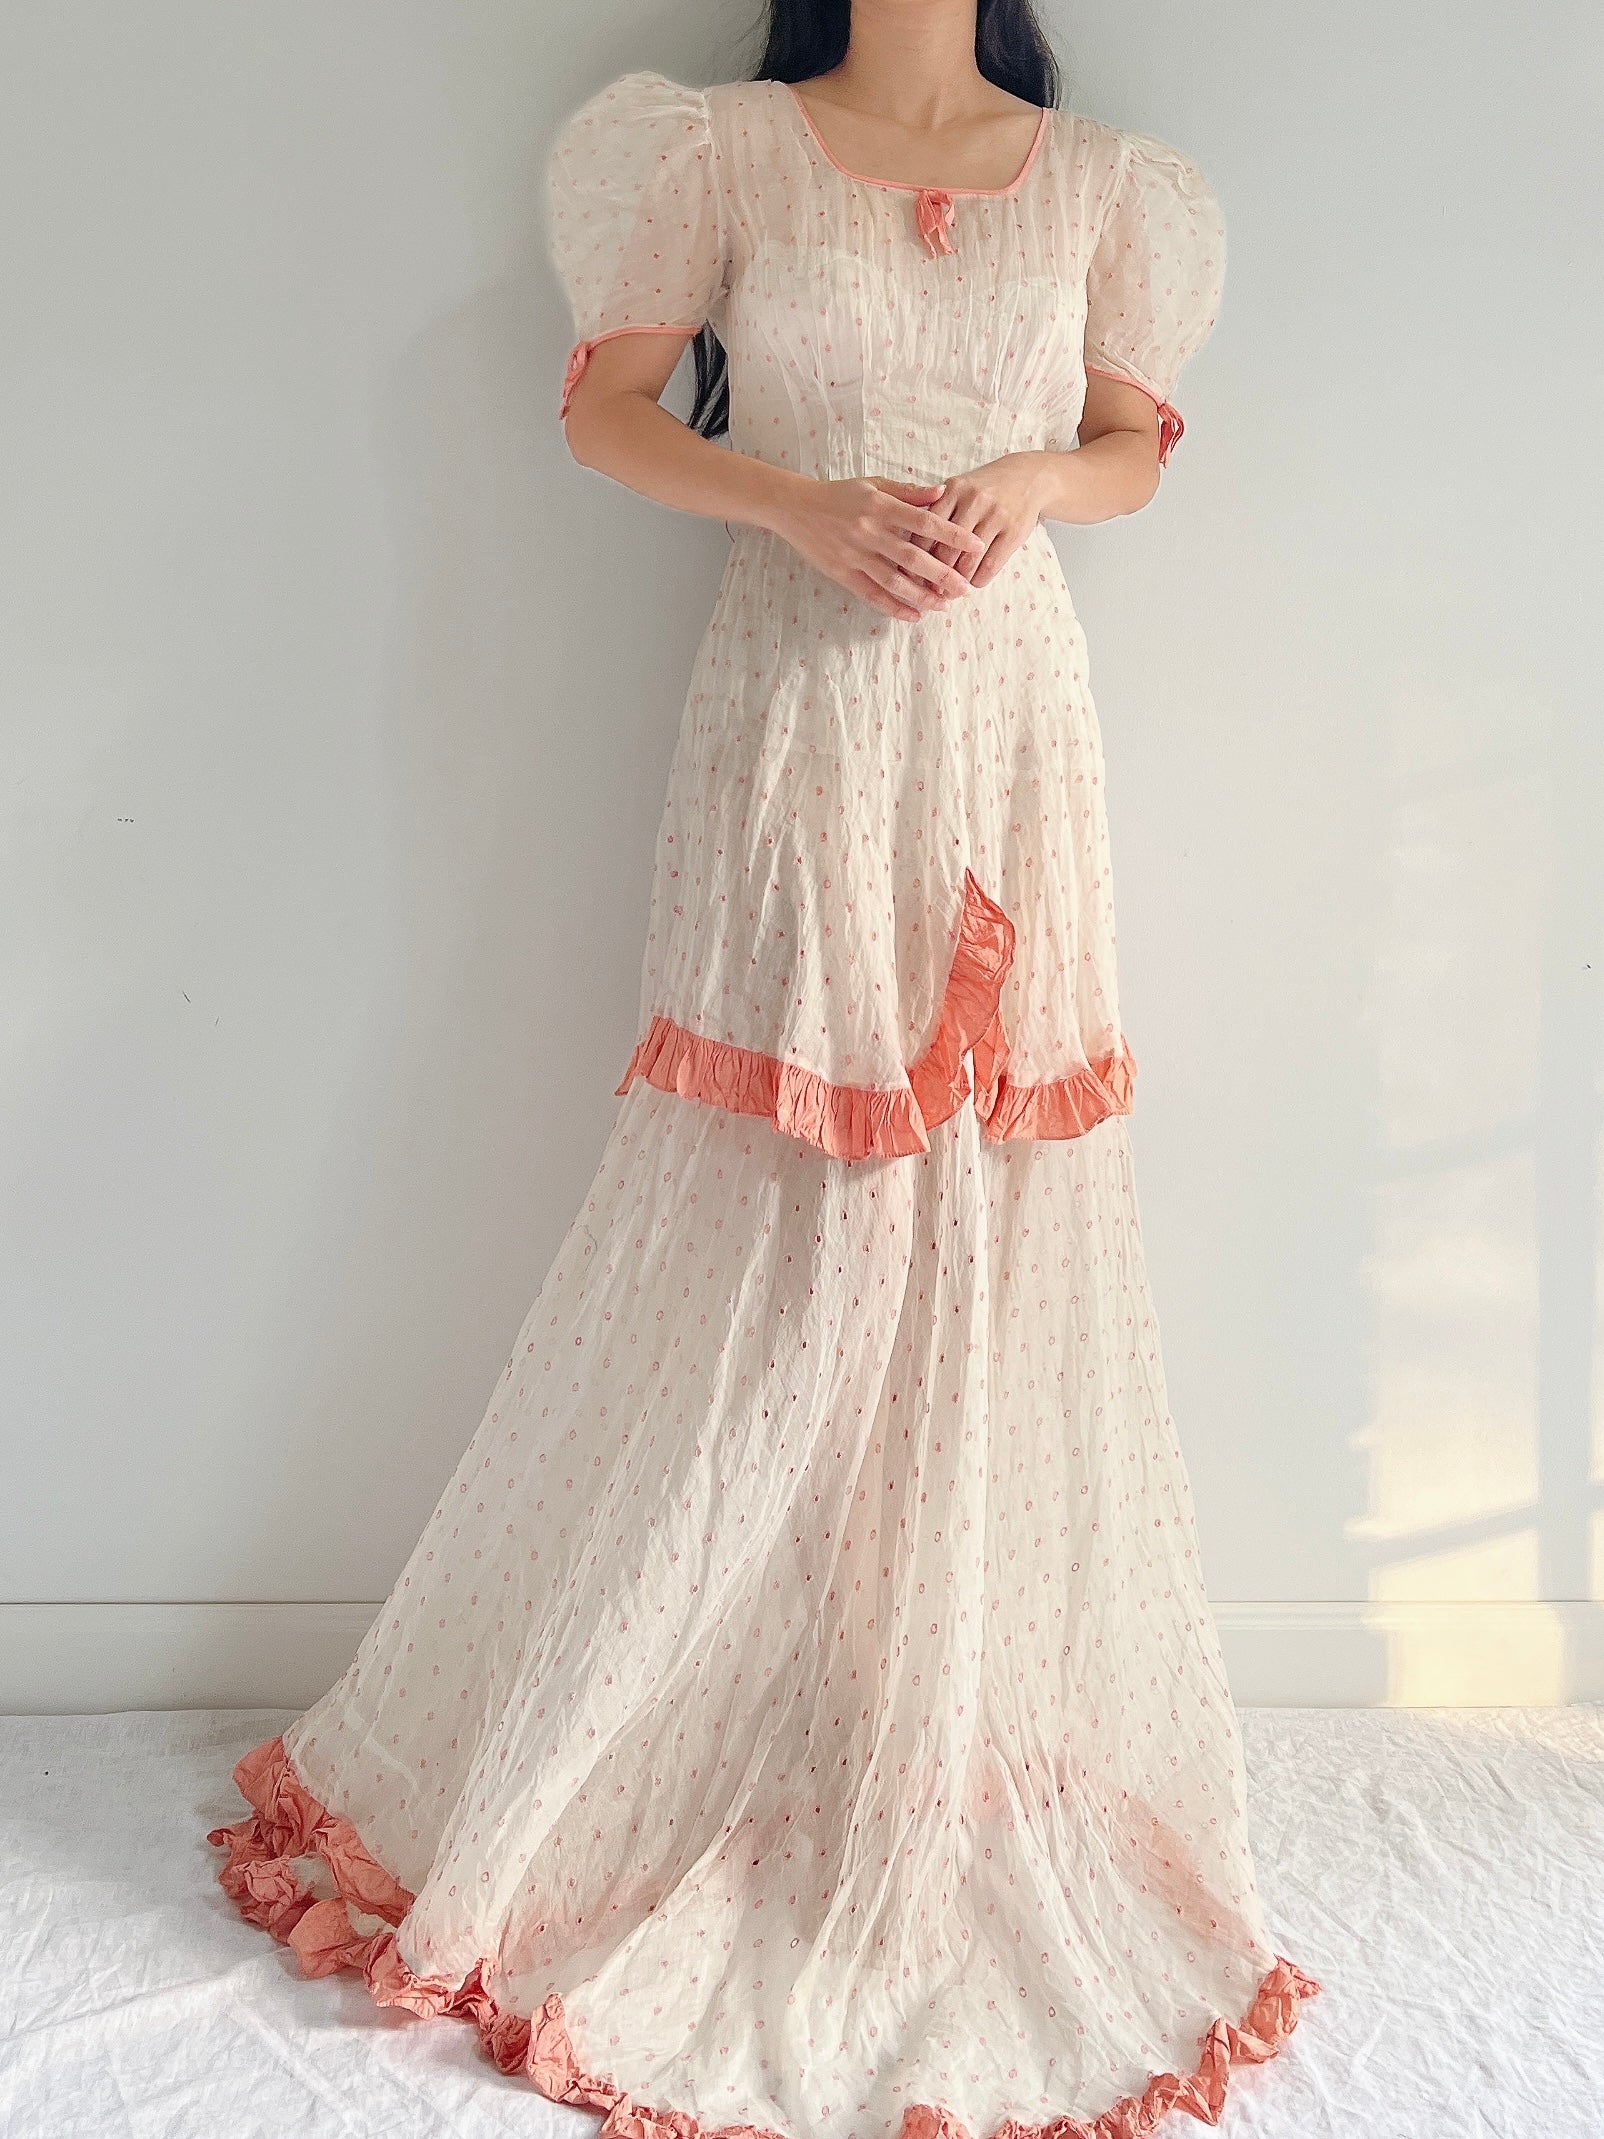 1930s Embroidered Organdy Dress - S